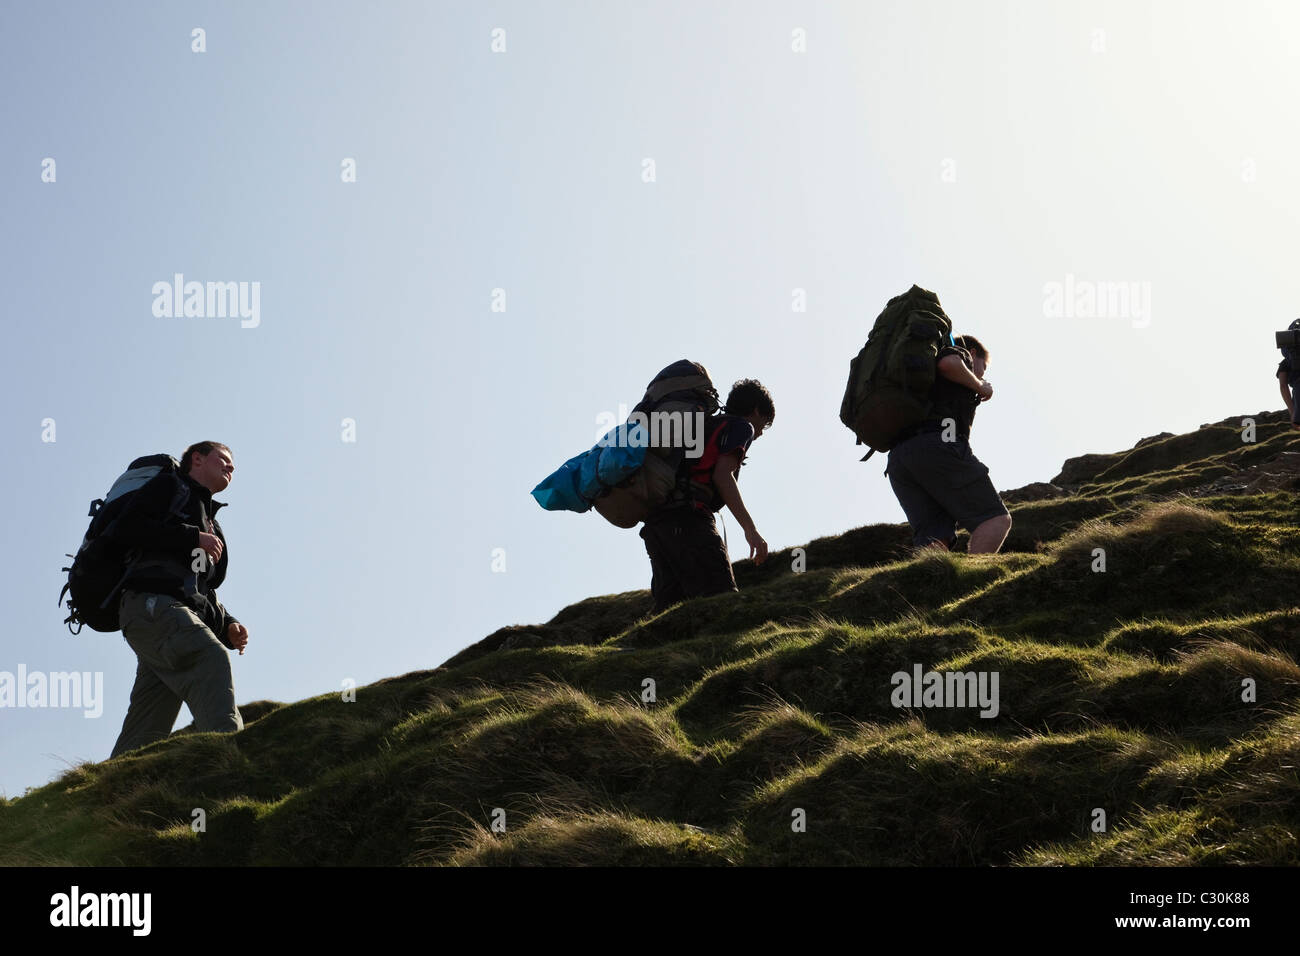 Young people backpacking on Duke of Edinburgh Award scheme expedition climbing up Cat Bells in Lake District National Park Cumbria England UK Britain Stock Photo